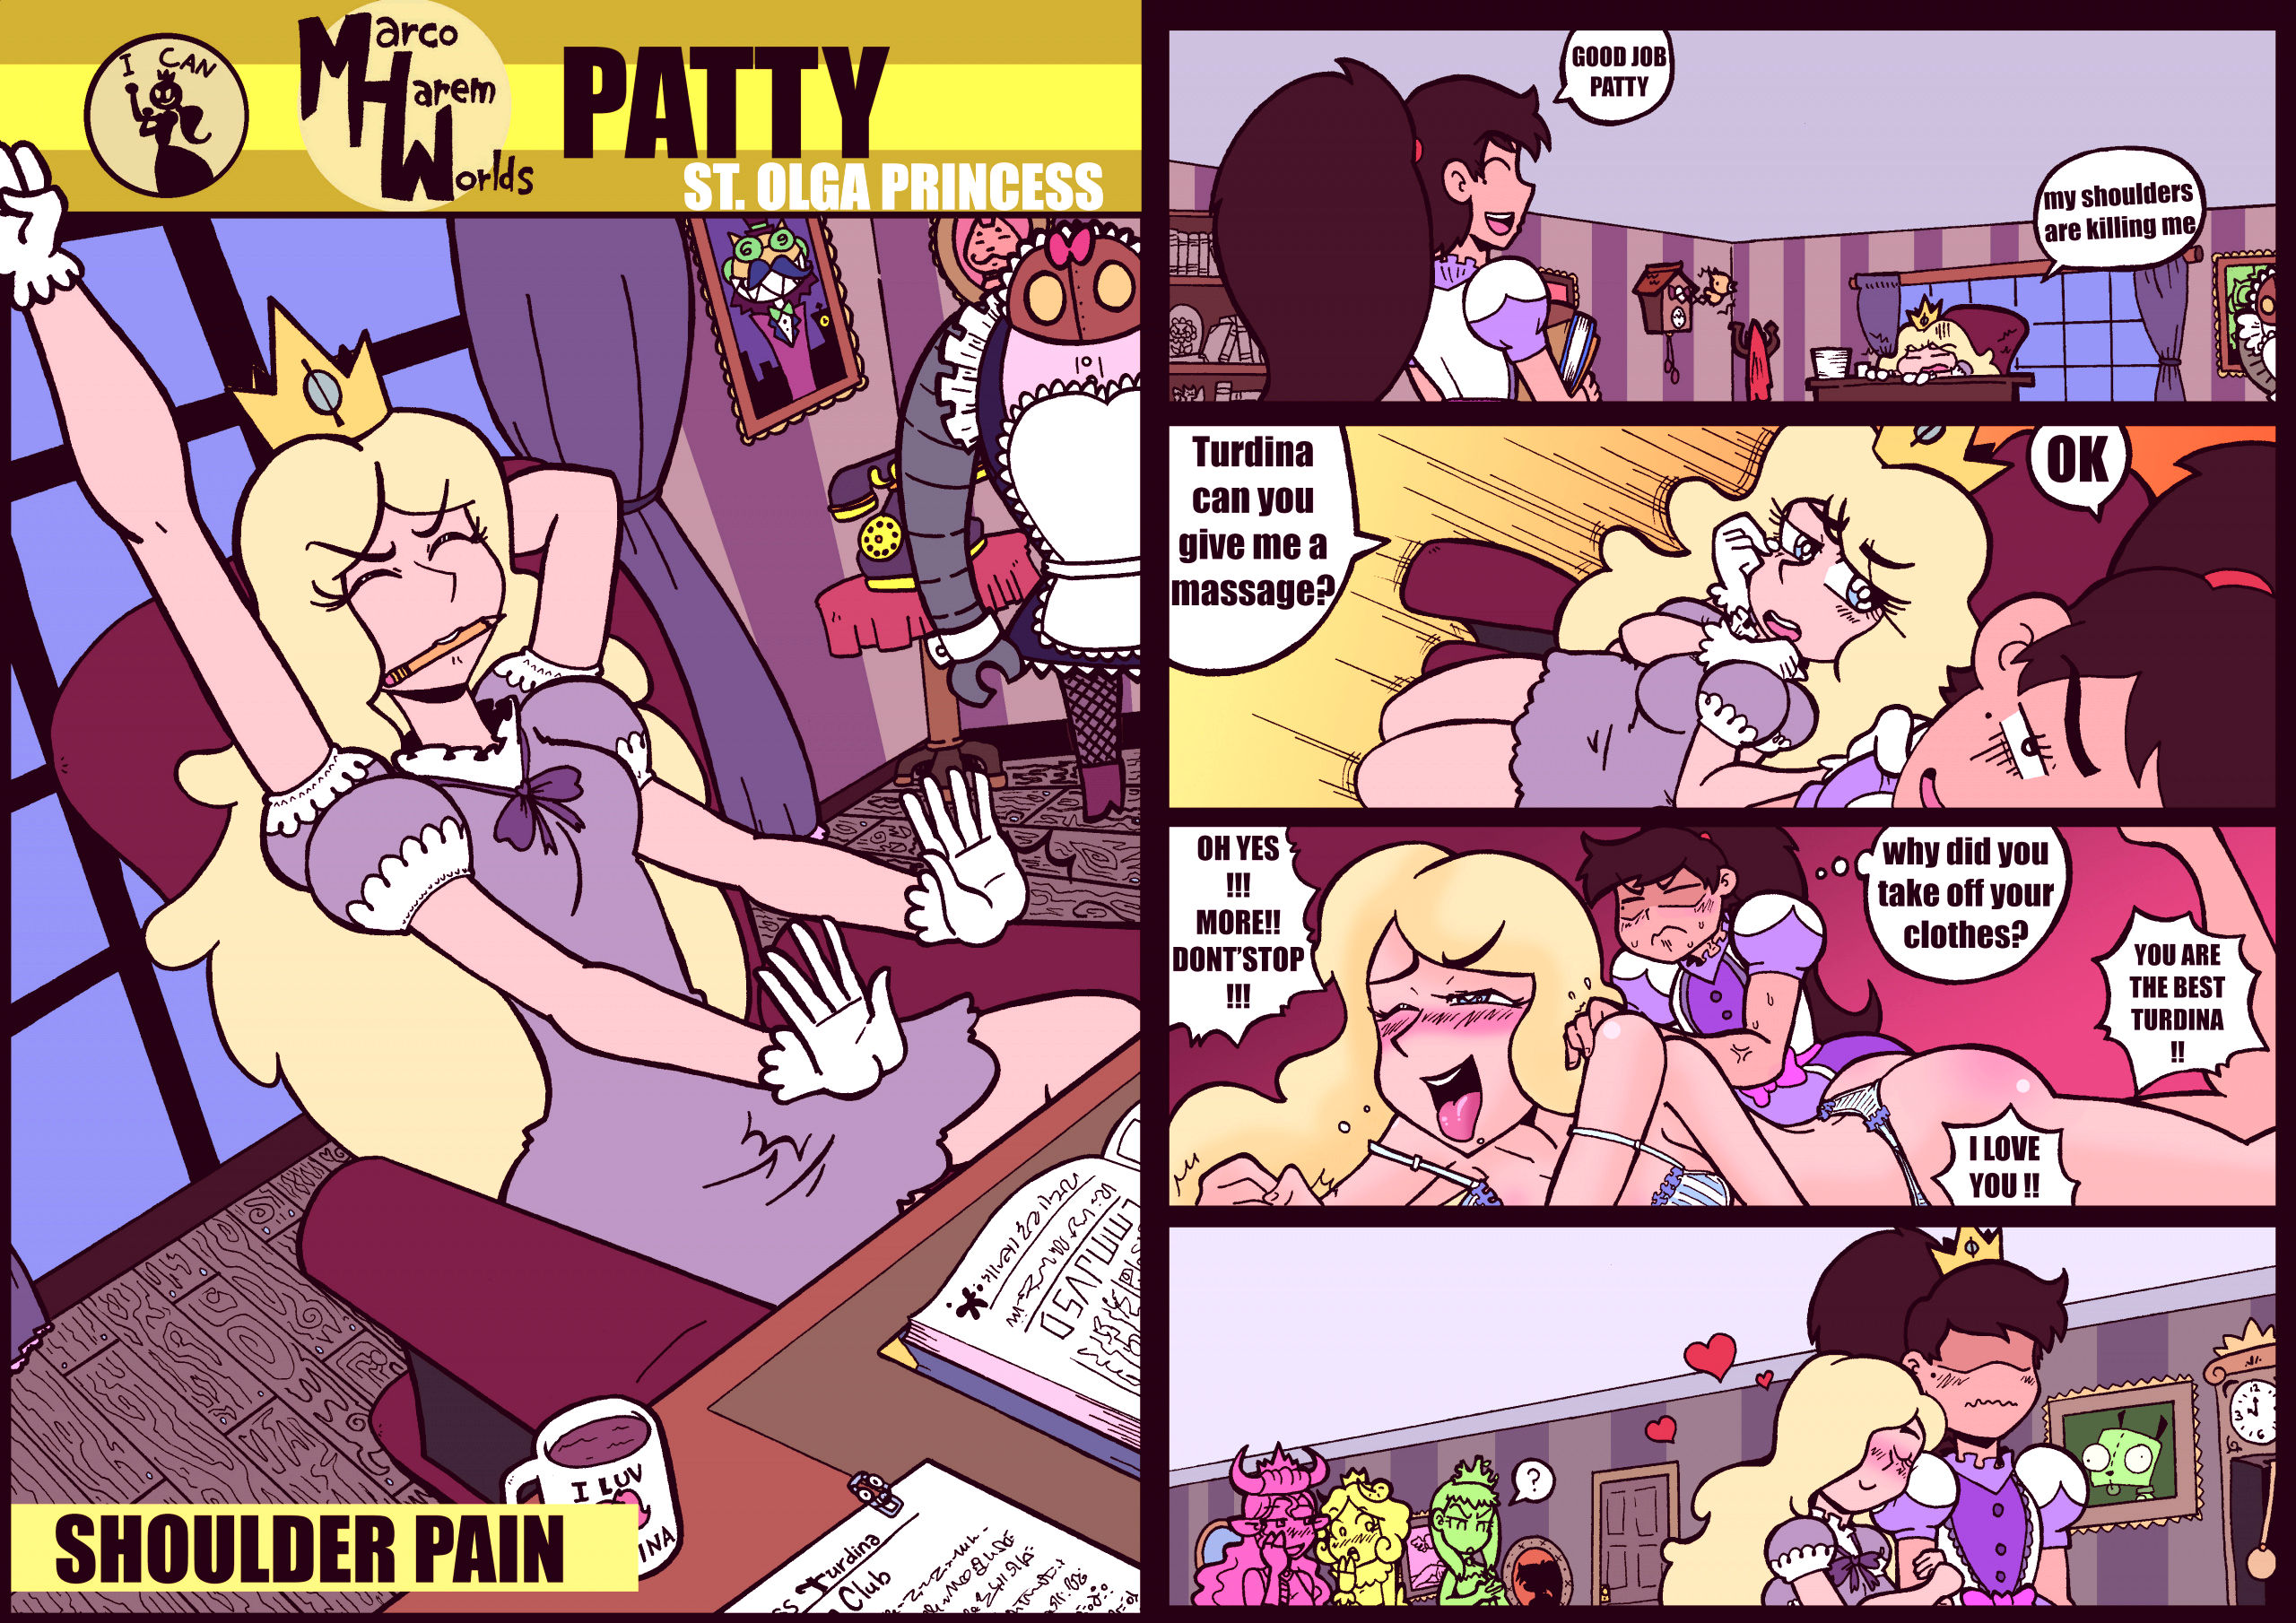 Marco harem worlds porn comic picture 18